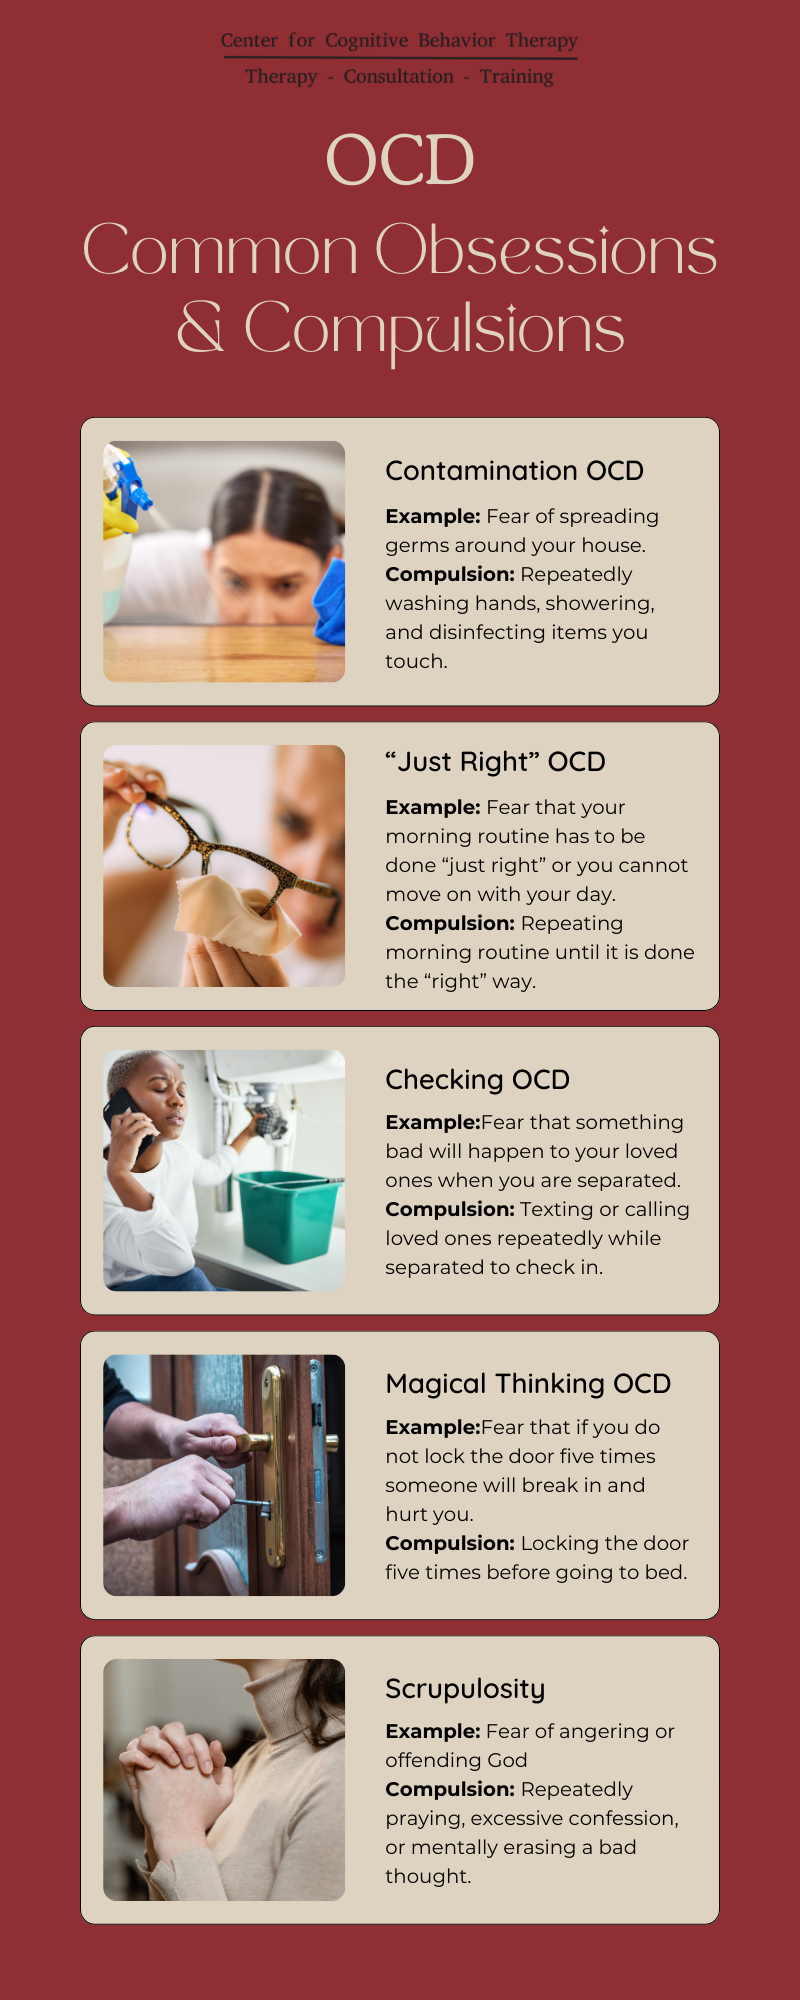 OCD: Common Obsessions & Compulsions